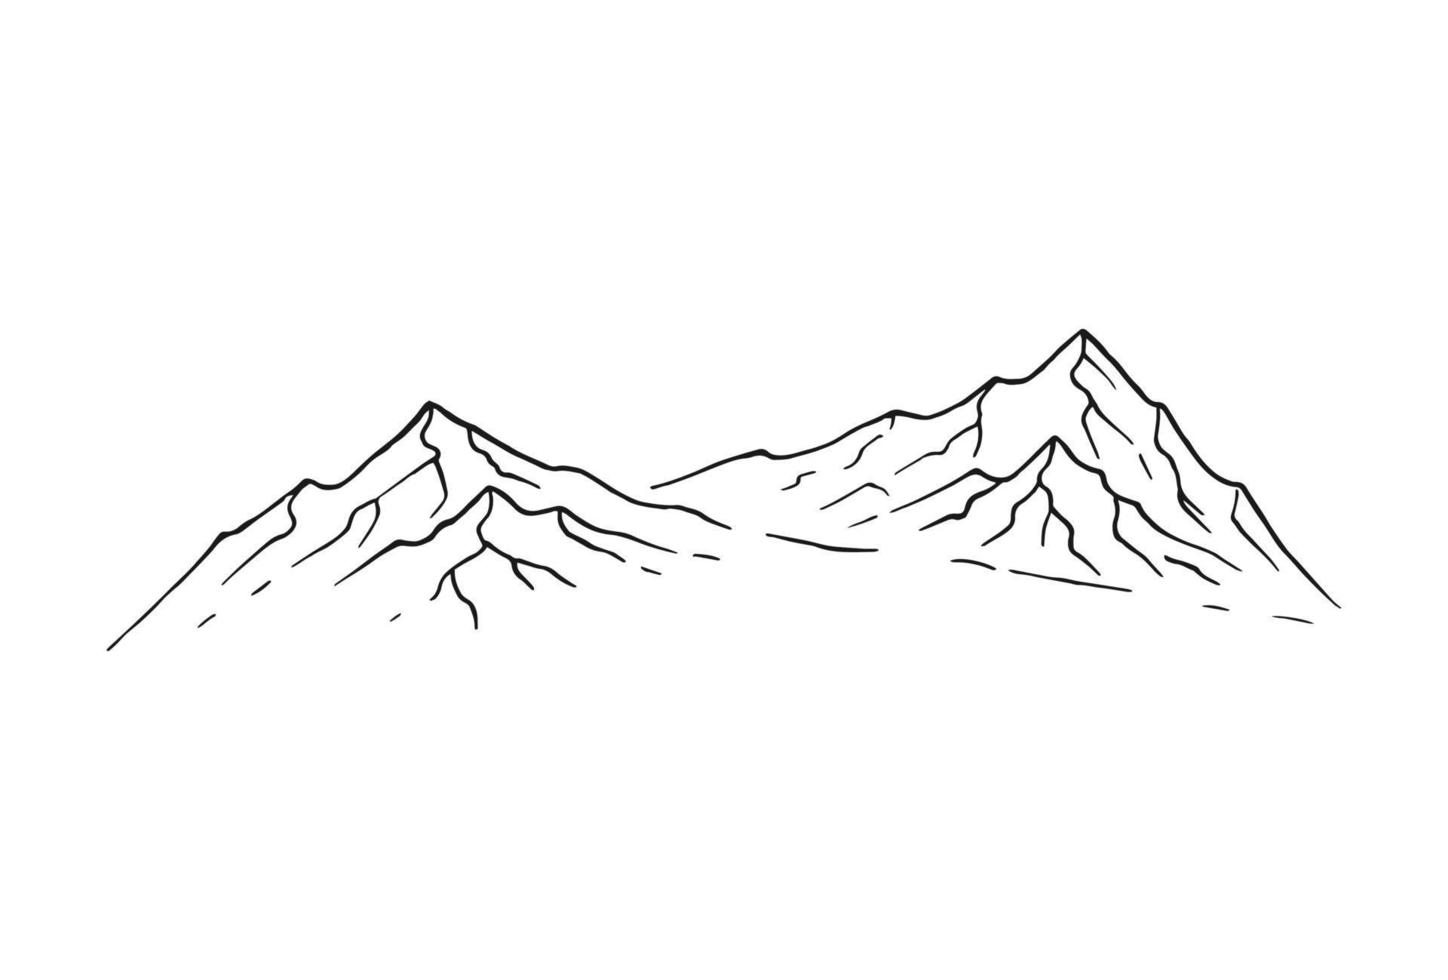 Mountains. Hand drawn rocky peaks. Vector illustration.